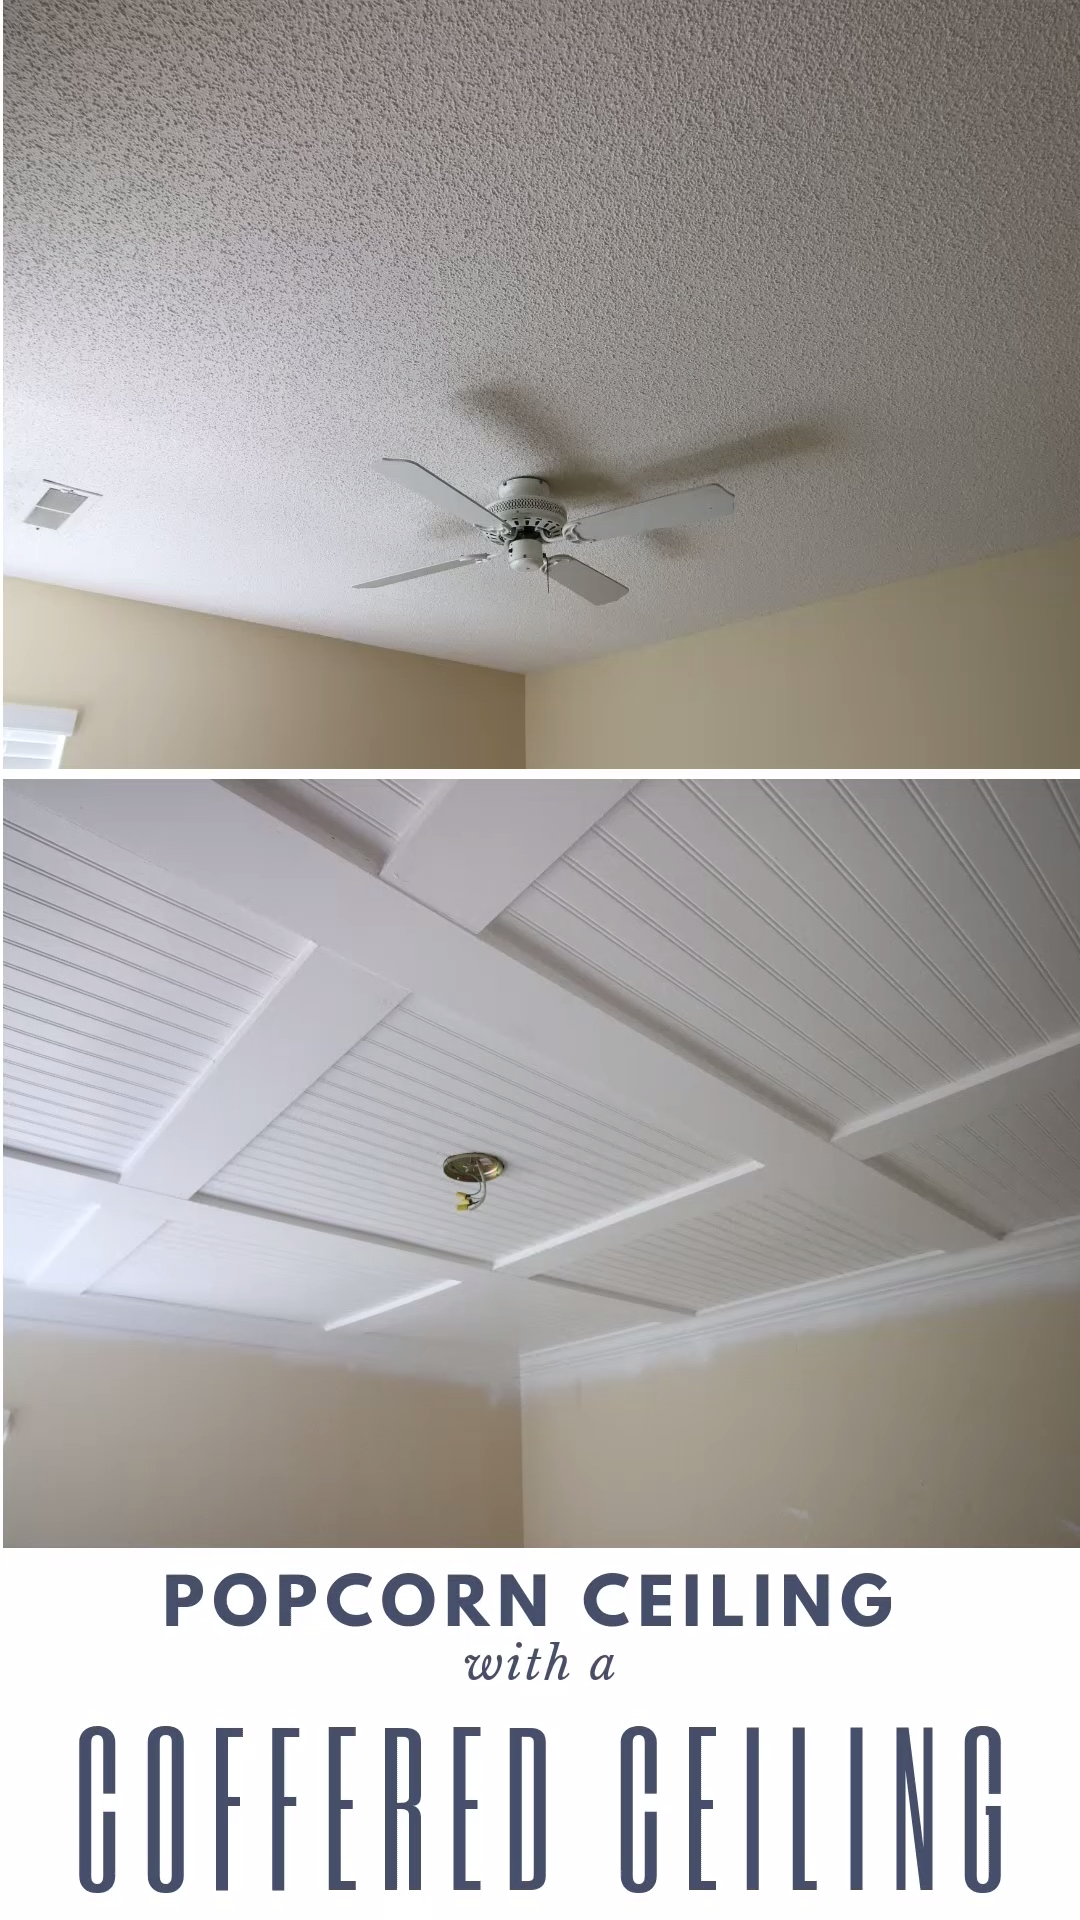 Cover a popcorn ceiling with a coffered ceiling - Cover a popcorn ceiling with a coffered ceiling -   17 diy House updates ideas